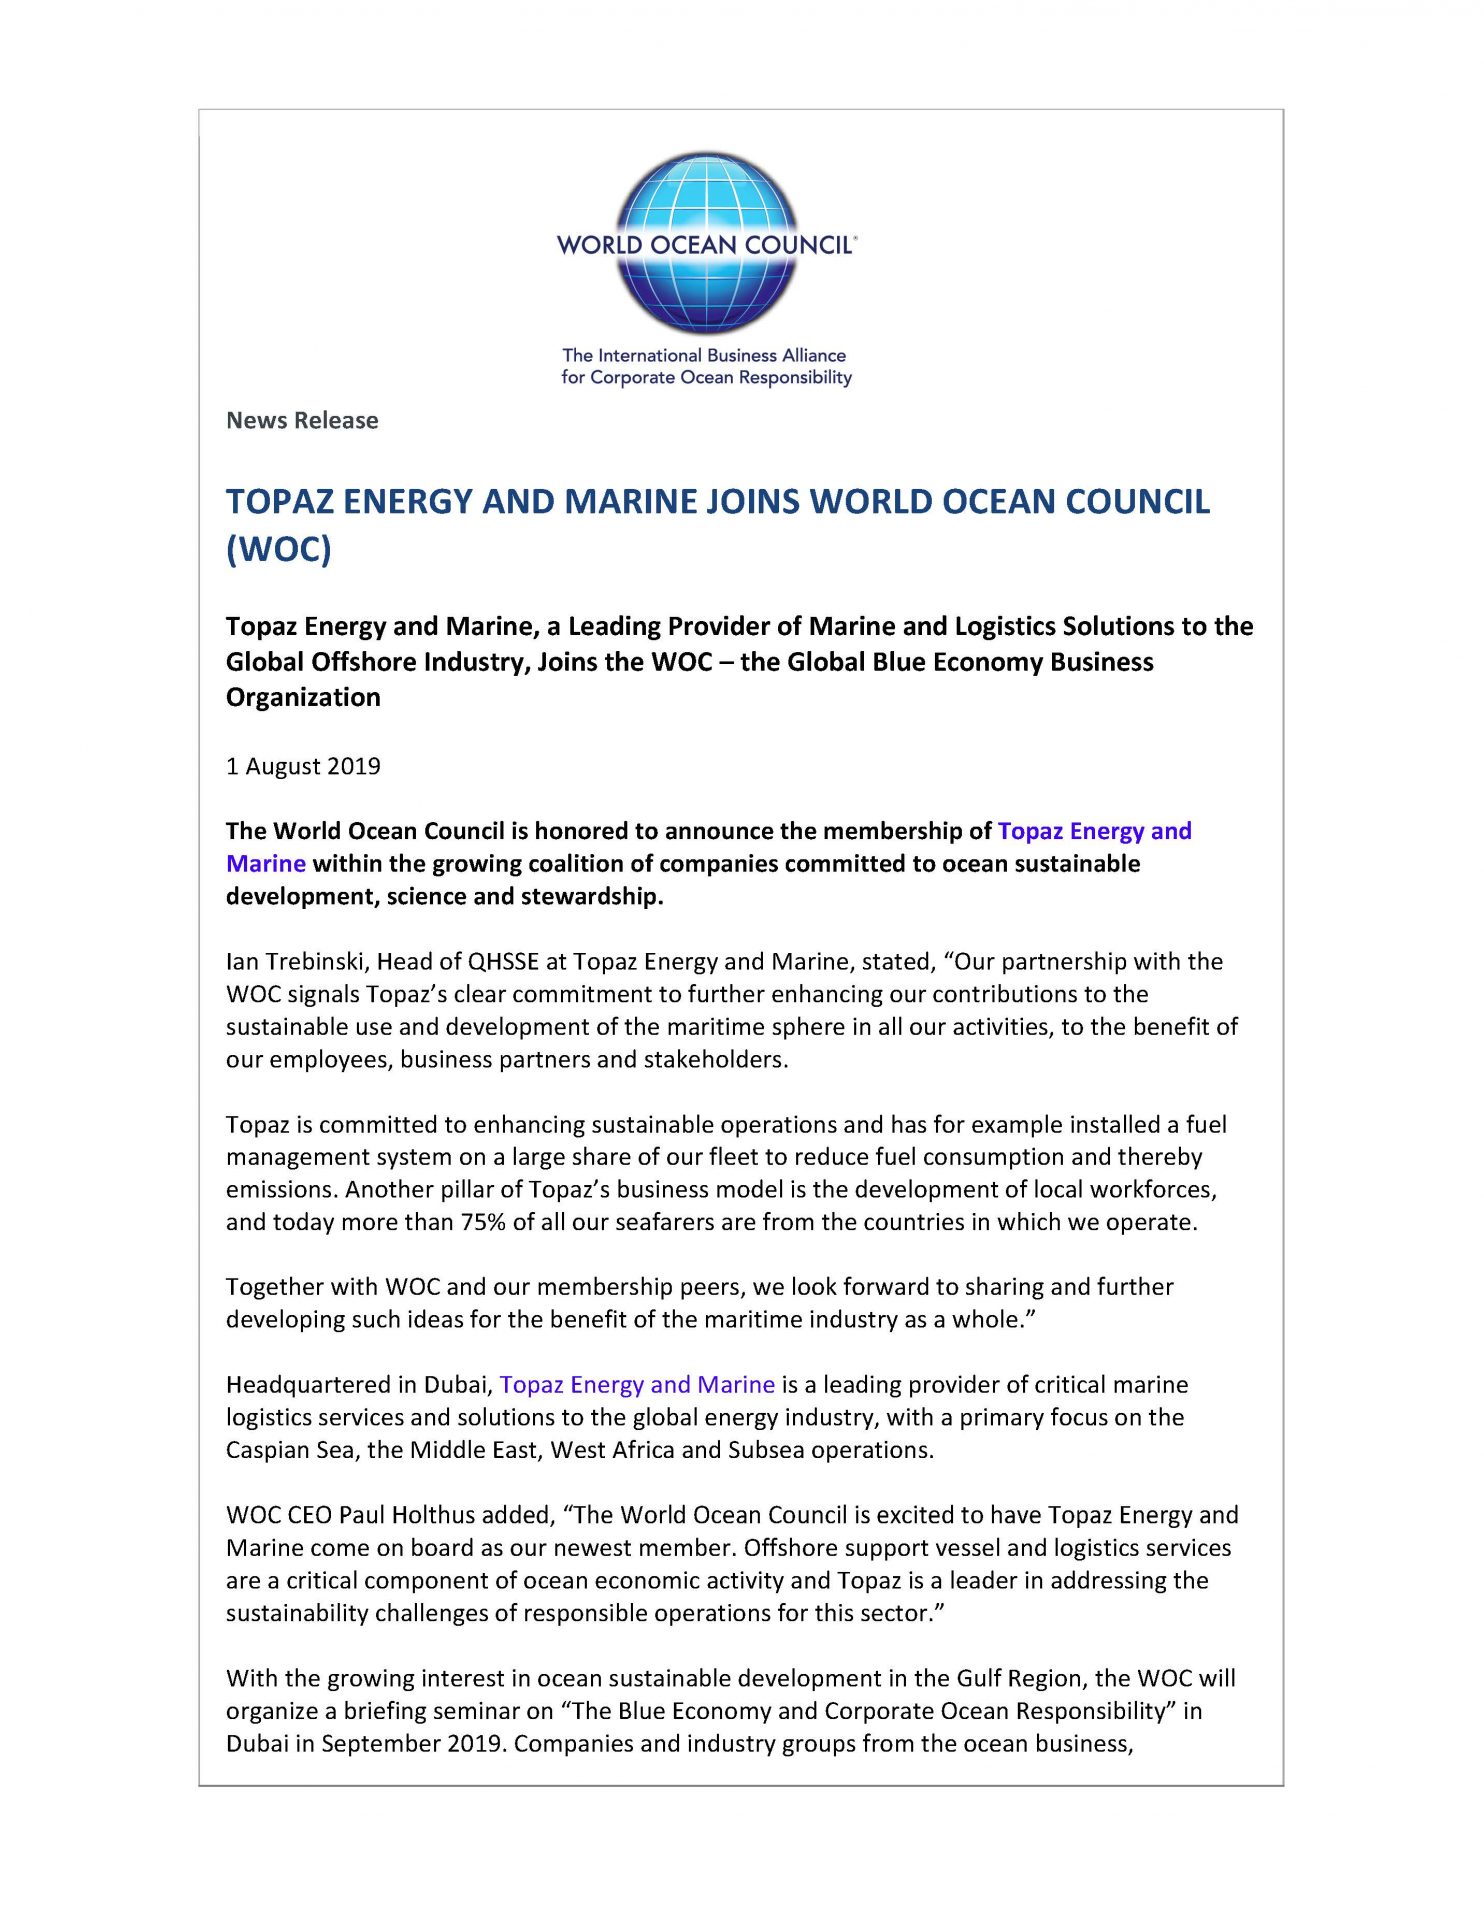 Topaz Energy and Marine Joins WOC - 1 August 2019